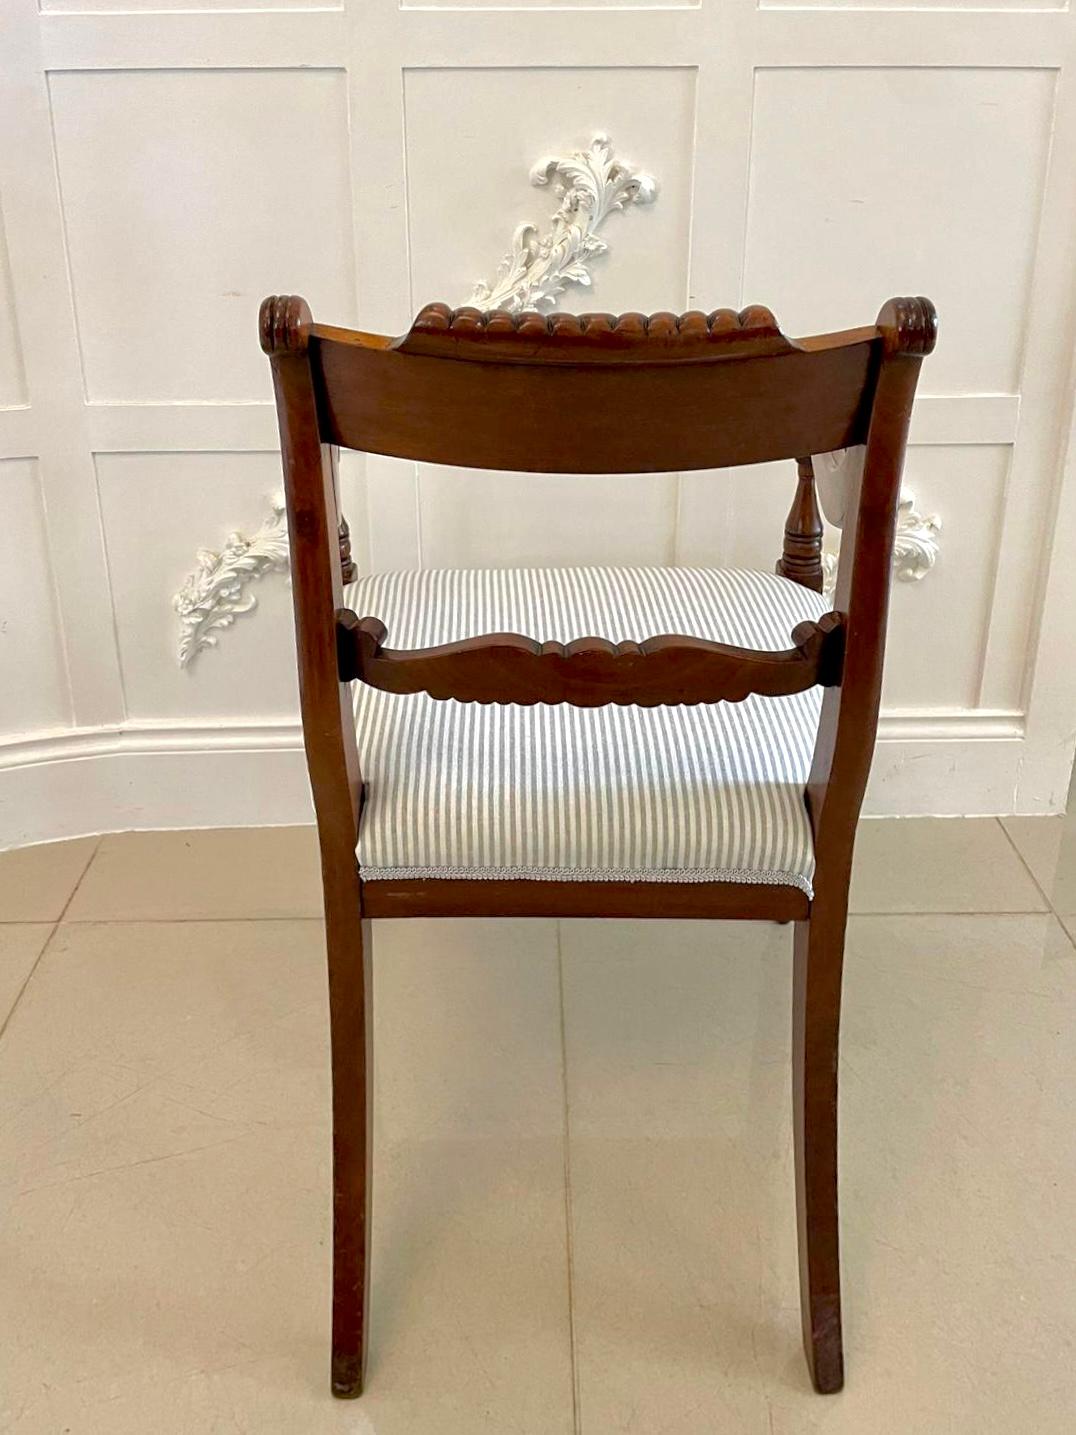 English Antique Regency Quality Carved Mahogany Desk Chair For Sale